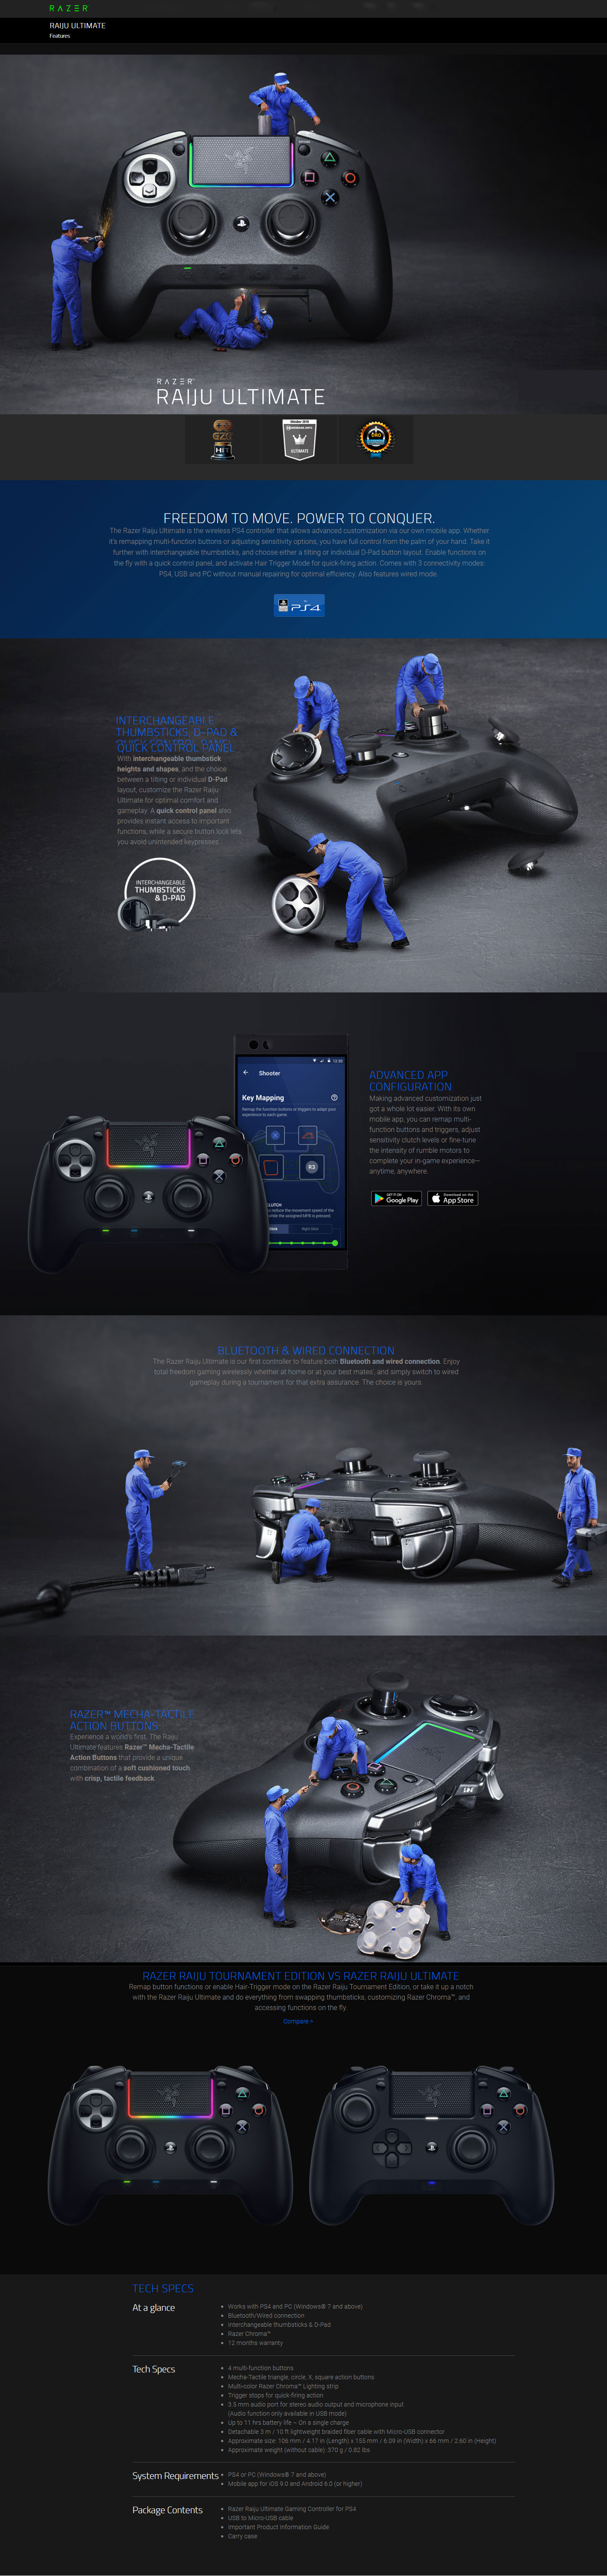 Buy Online Razer Raiju Ultimate - Wireless and Wired Gaming Controller for PS4 2019 (RZ06-02600300-R3G1)